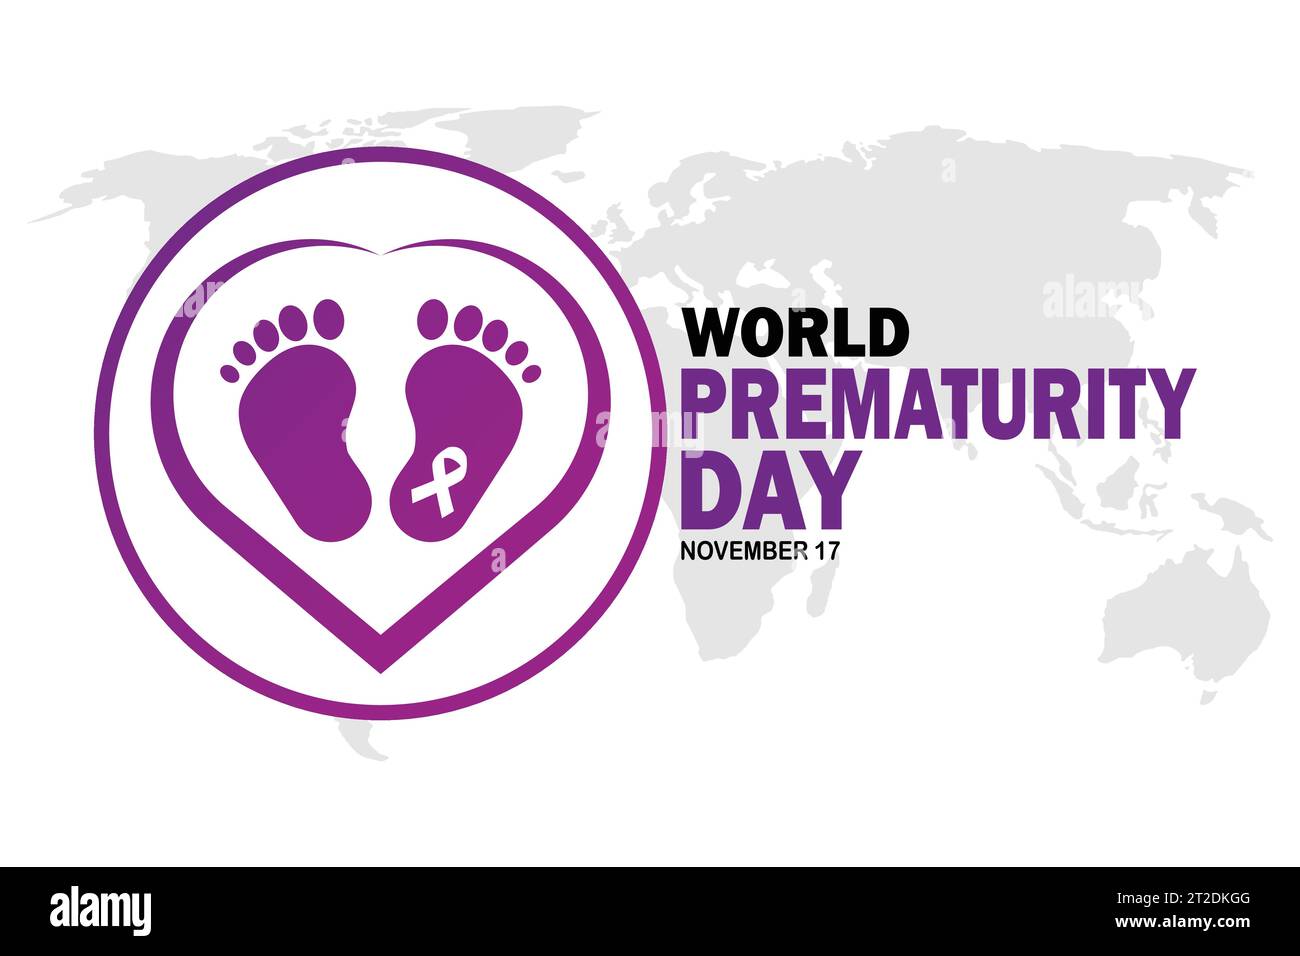 World Prematurity Day Vector illustration. November 17.Suitable for greeting card, poster and banner Stock Vector